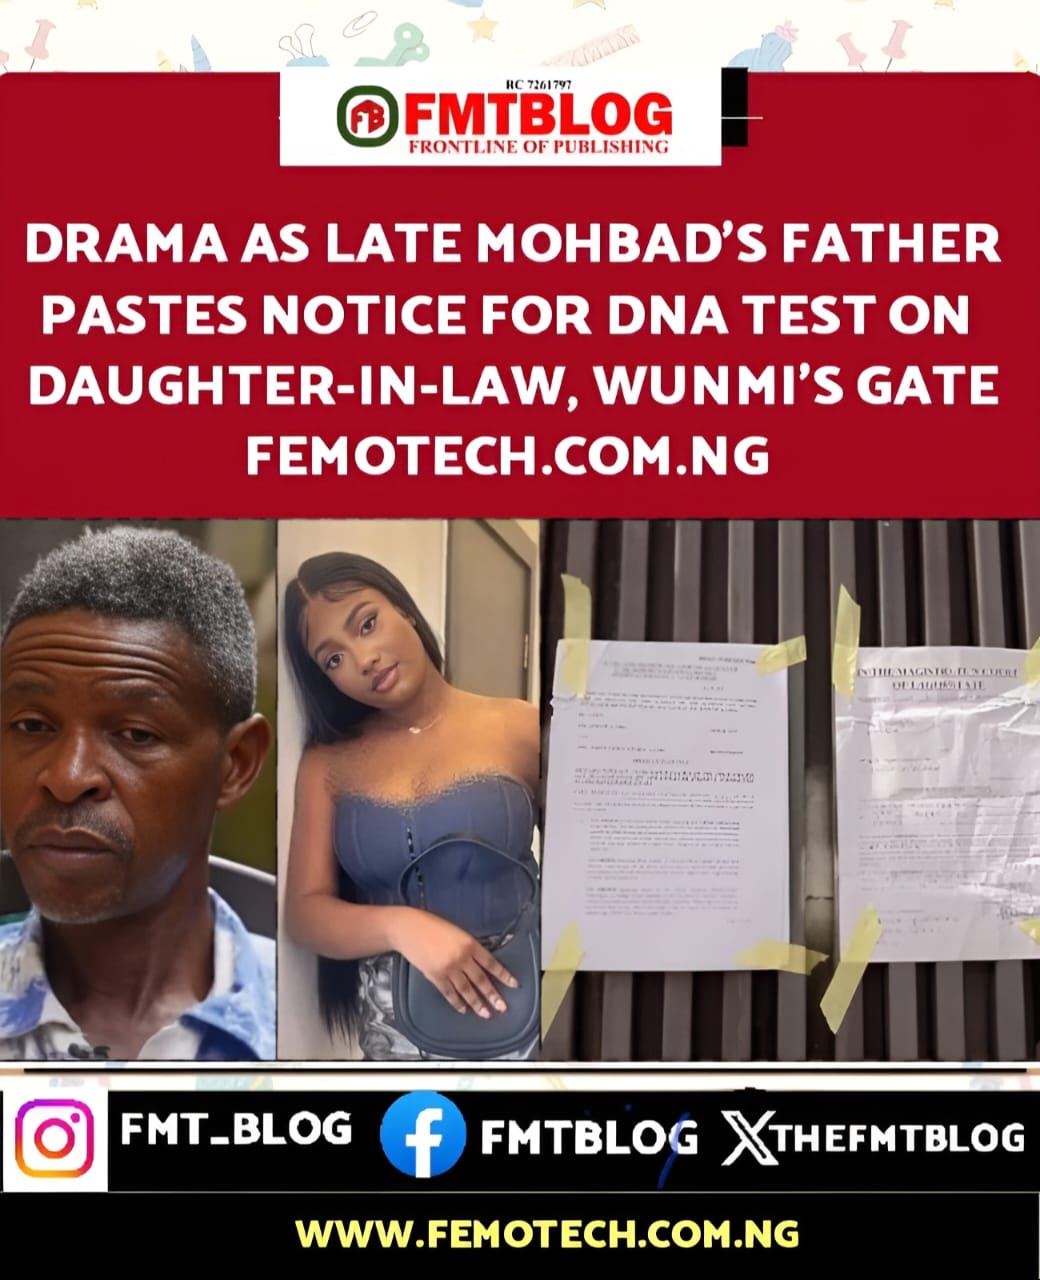 Drama As Late Mohbad’s Father Pastes Notice For DNA Test On Daughter-In-Law, Wunmi’s Gate